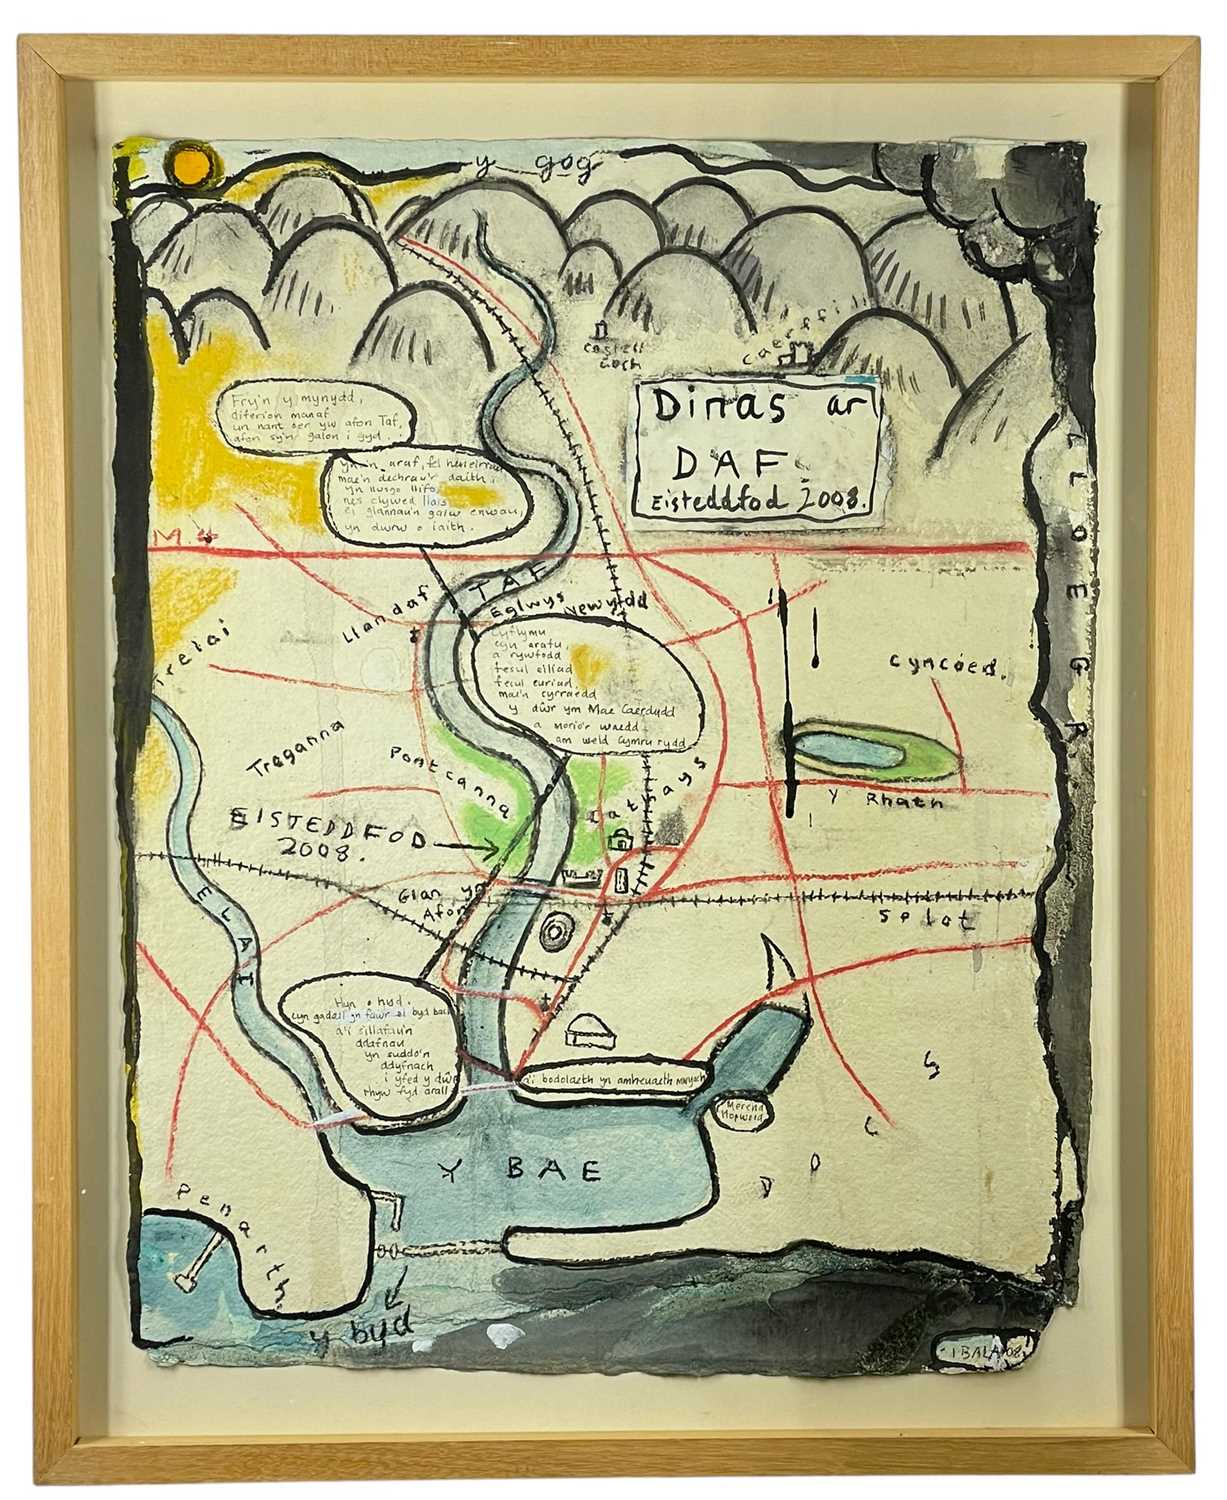 ‡ IWAN BALA mixed media - stylised map of Cardiff with verses, entitled 'Dinas ar Daf' relating to - Image 2 of 2